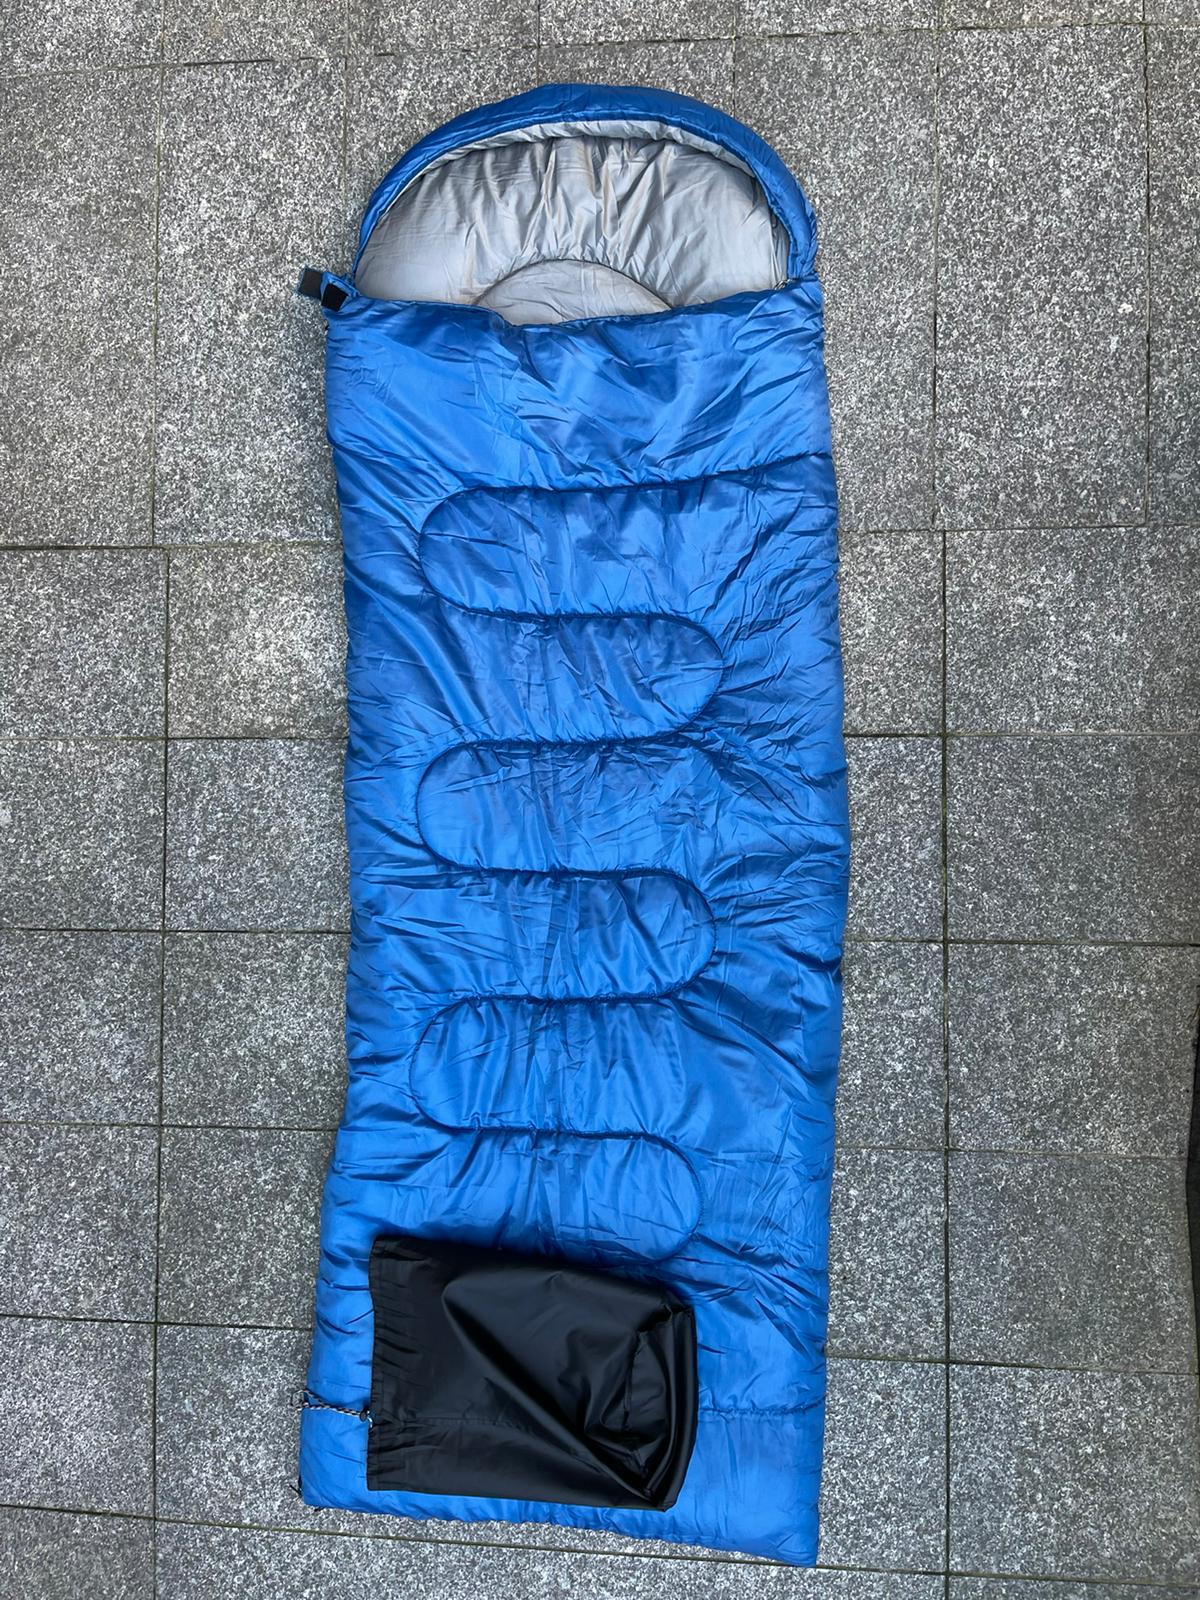 military sleeping bags for sale